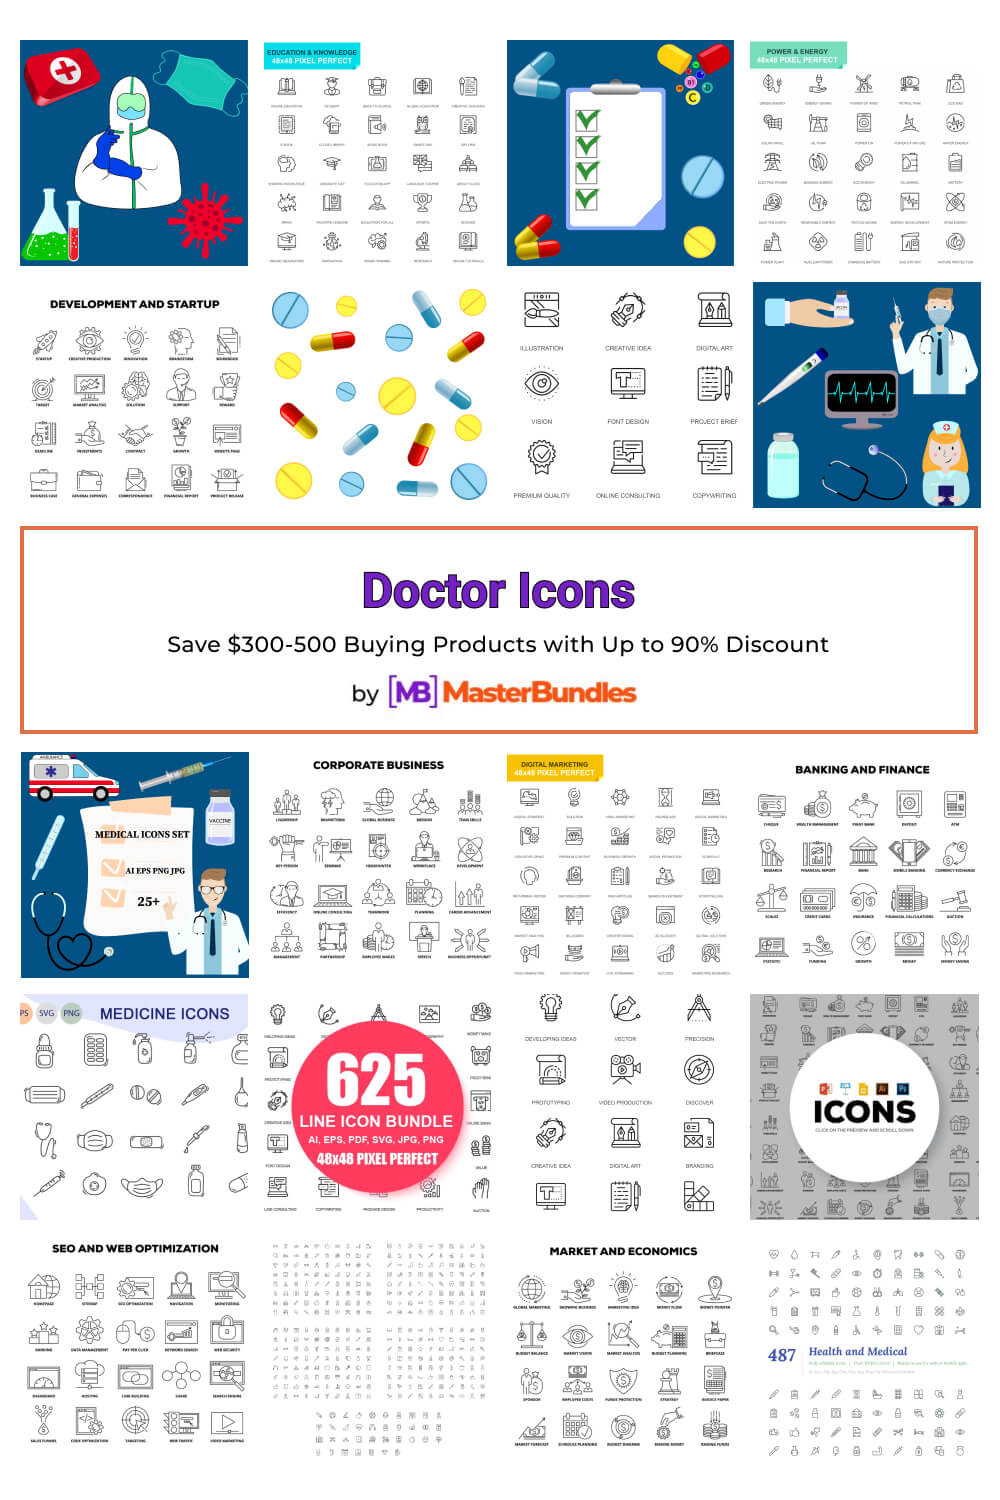 doctor icons pinterest image.